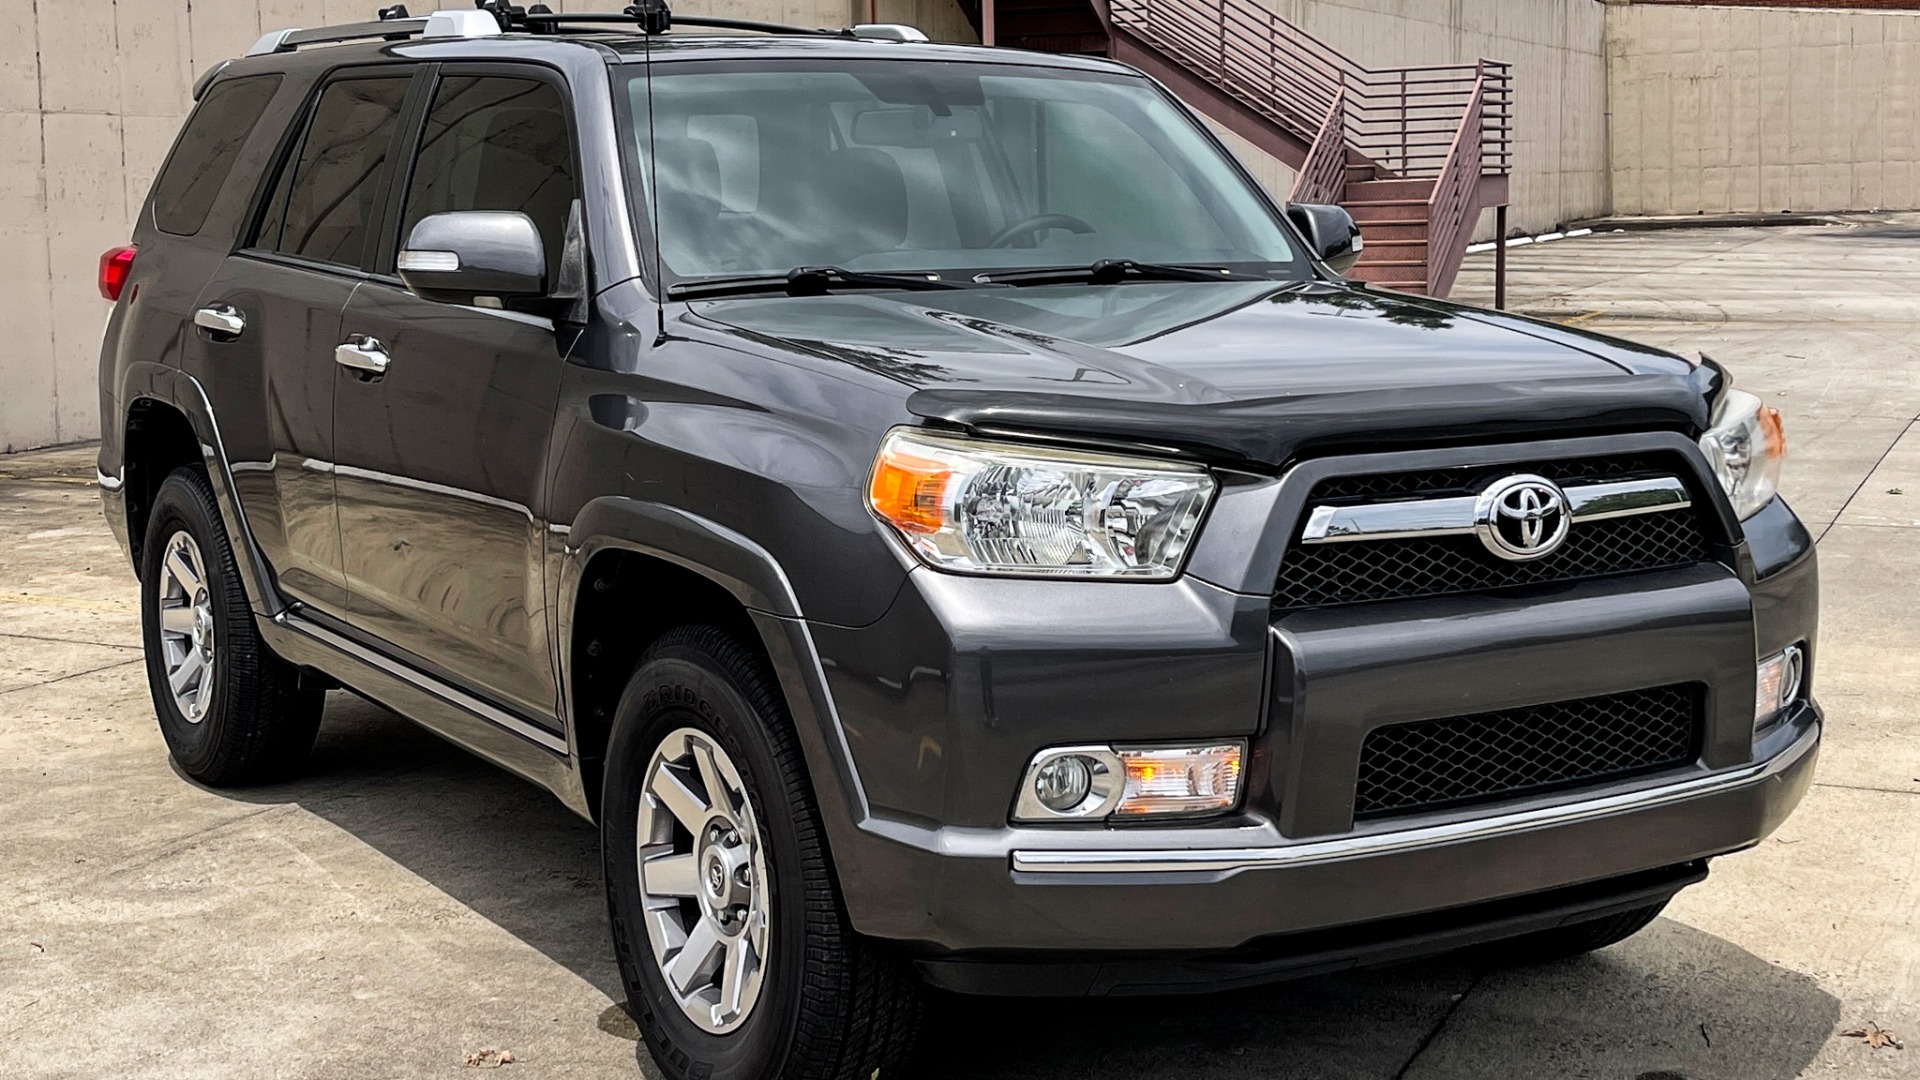 Used 2011 Toyota 4Runner SR5 / SUNROOF / 4X4 / BLUETOOTH / BACKUP CAMERA for sale Sold at Formula Imports in Charlotte NC 28227 5